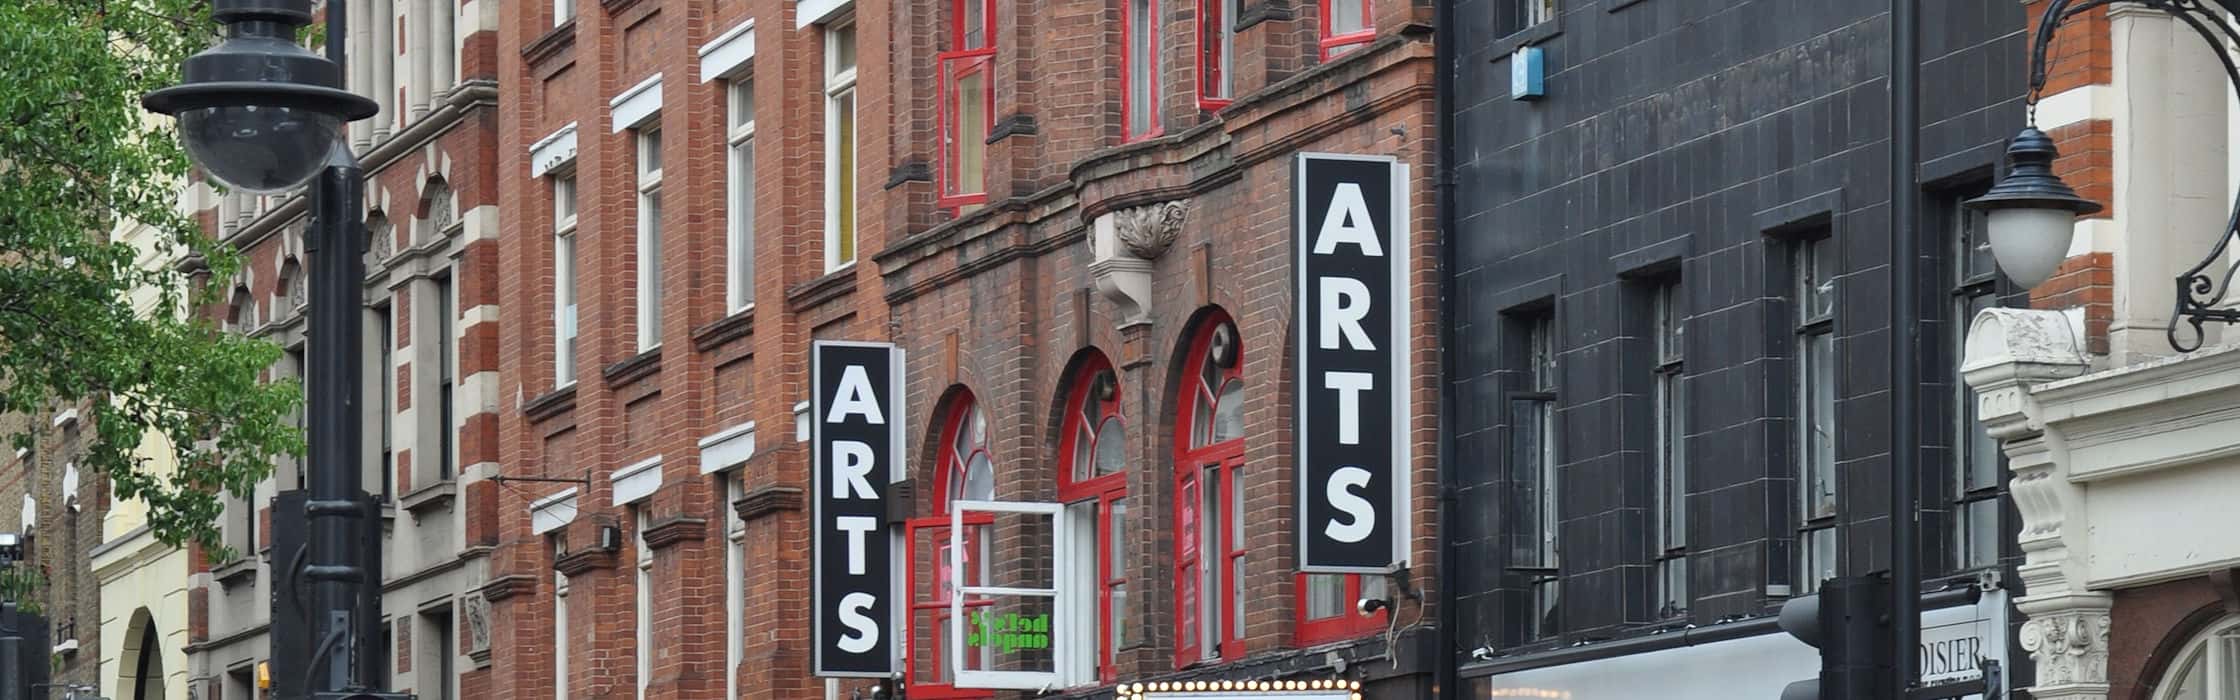 What's On at The Arts Theatre, London